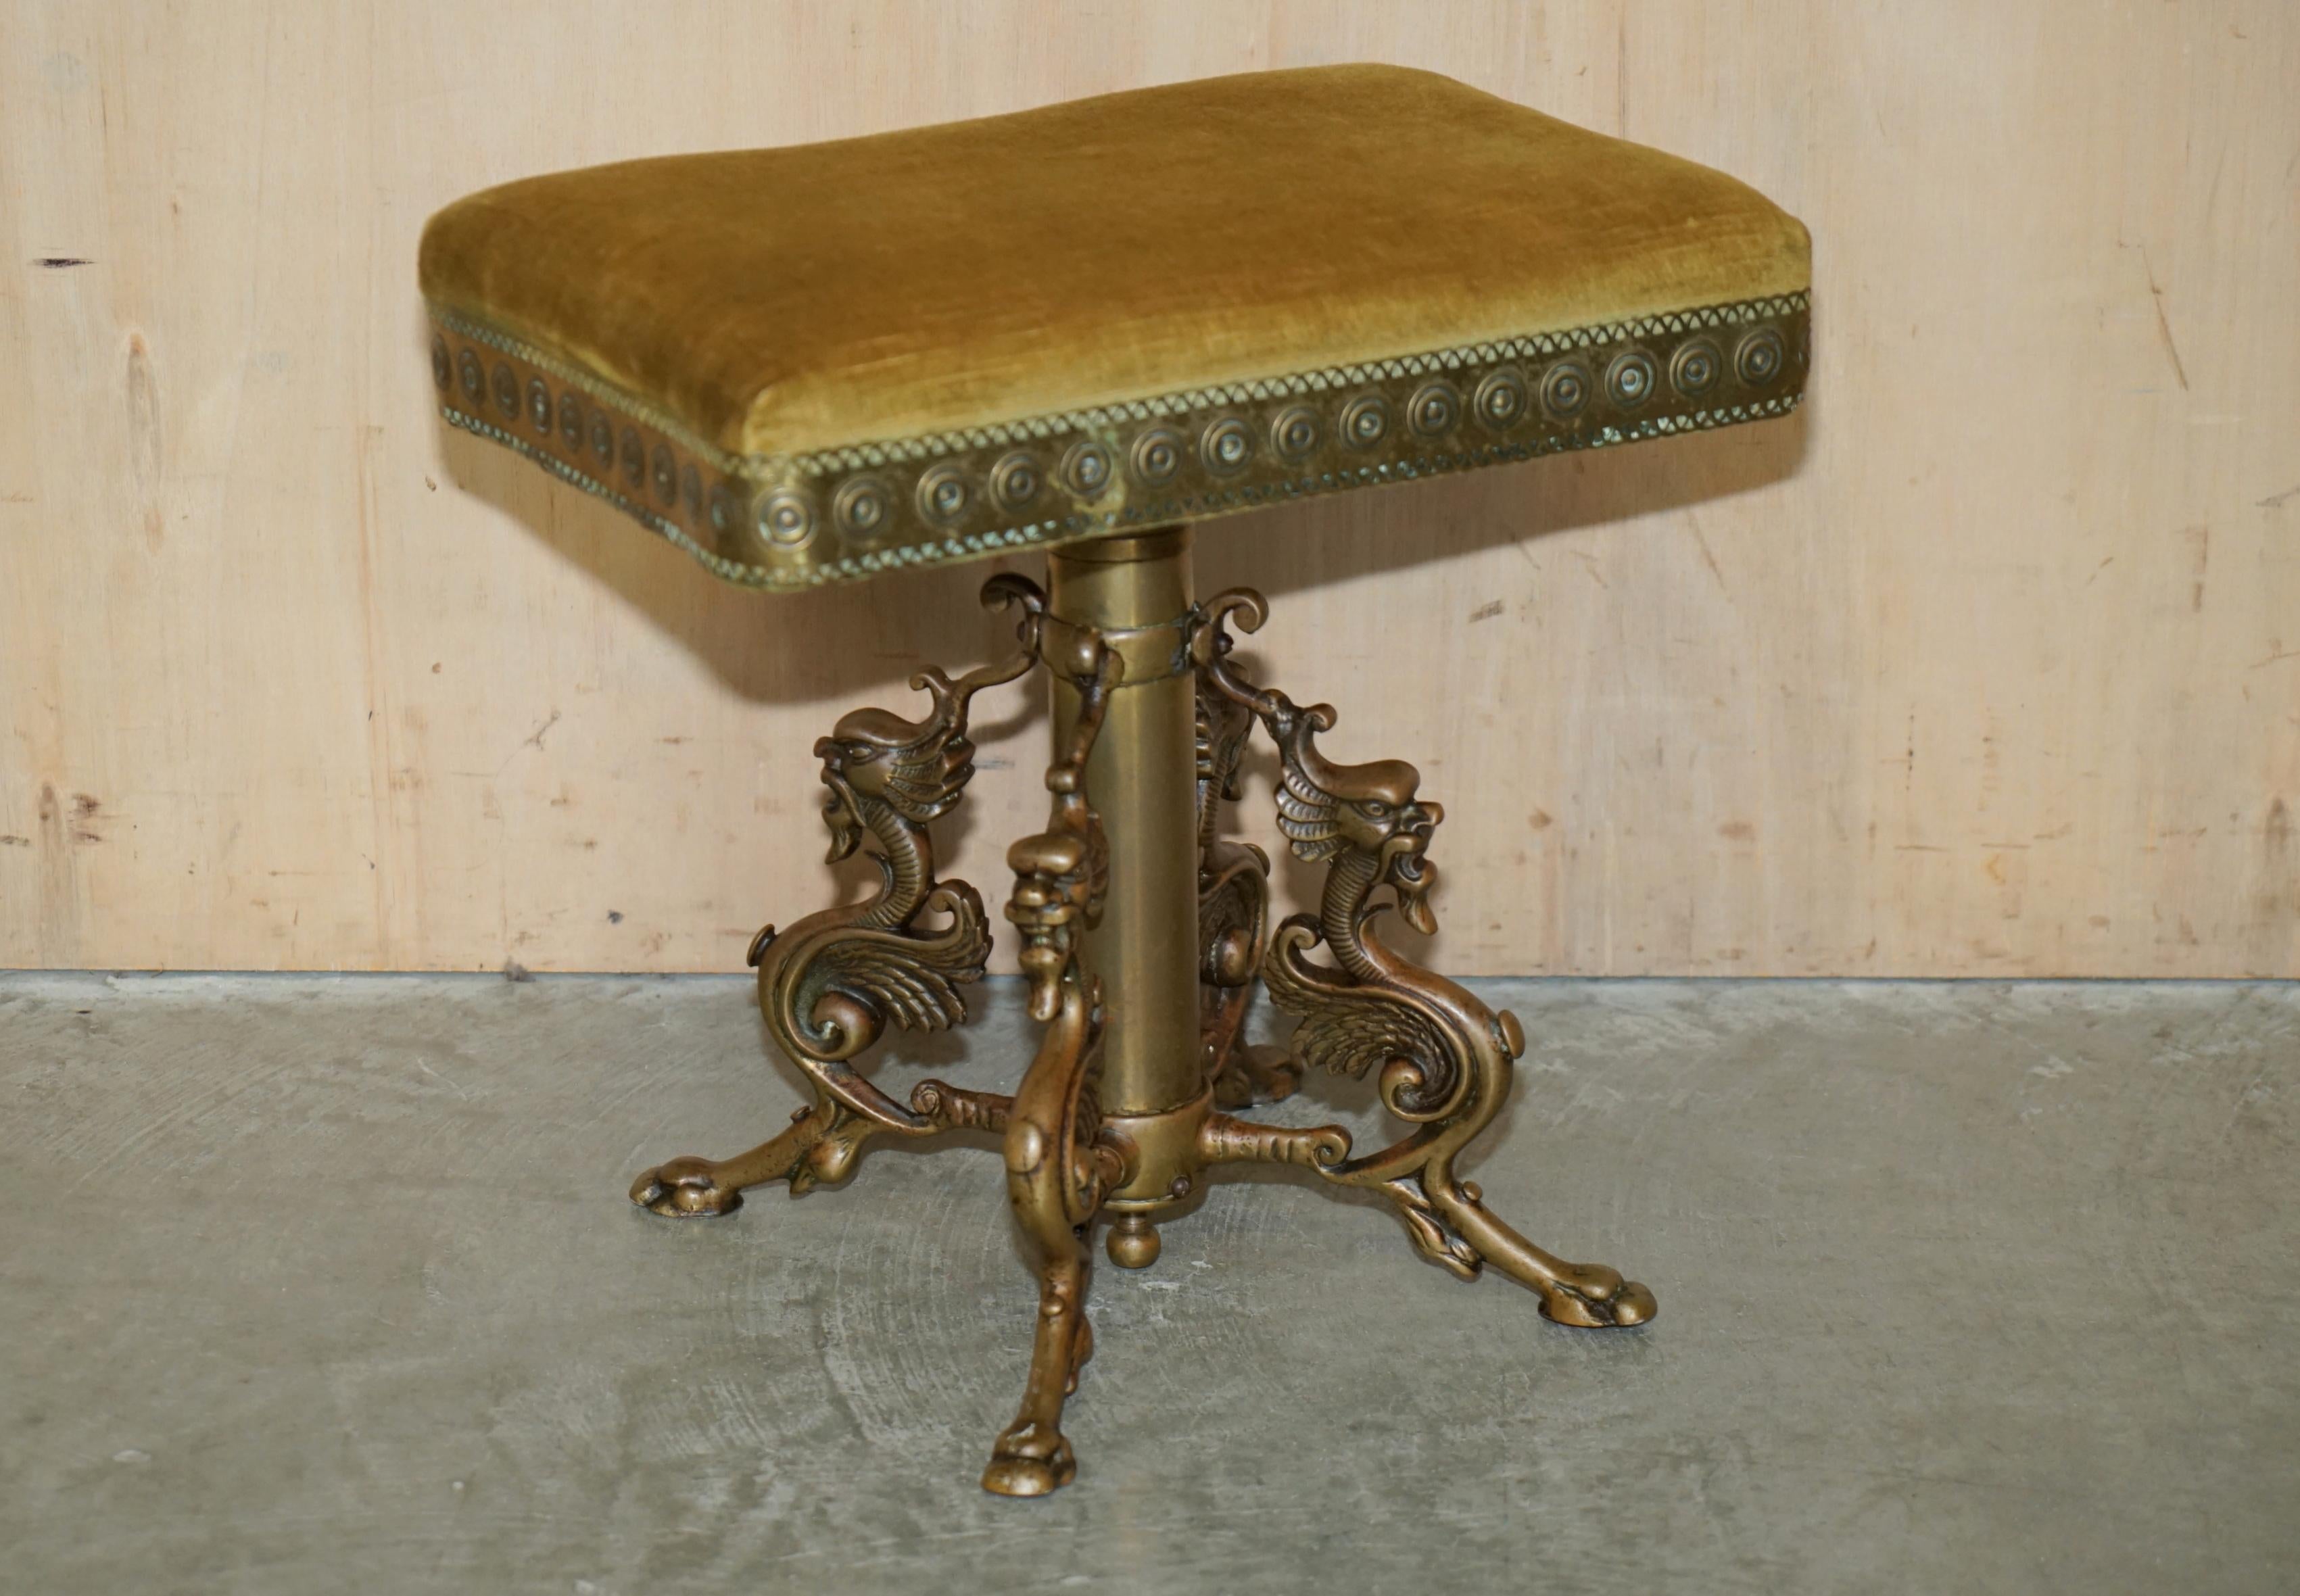 Royal House Antiques

Royal House Antiques is delighted to offer for sale this super decorative circa 1860-1880 Italian stool depicting four Dragons to the base legs 

Please note the delivery fee listed is just a guide, it covers within the M25